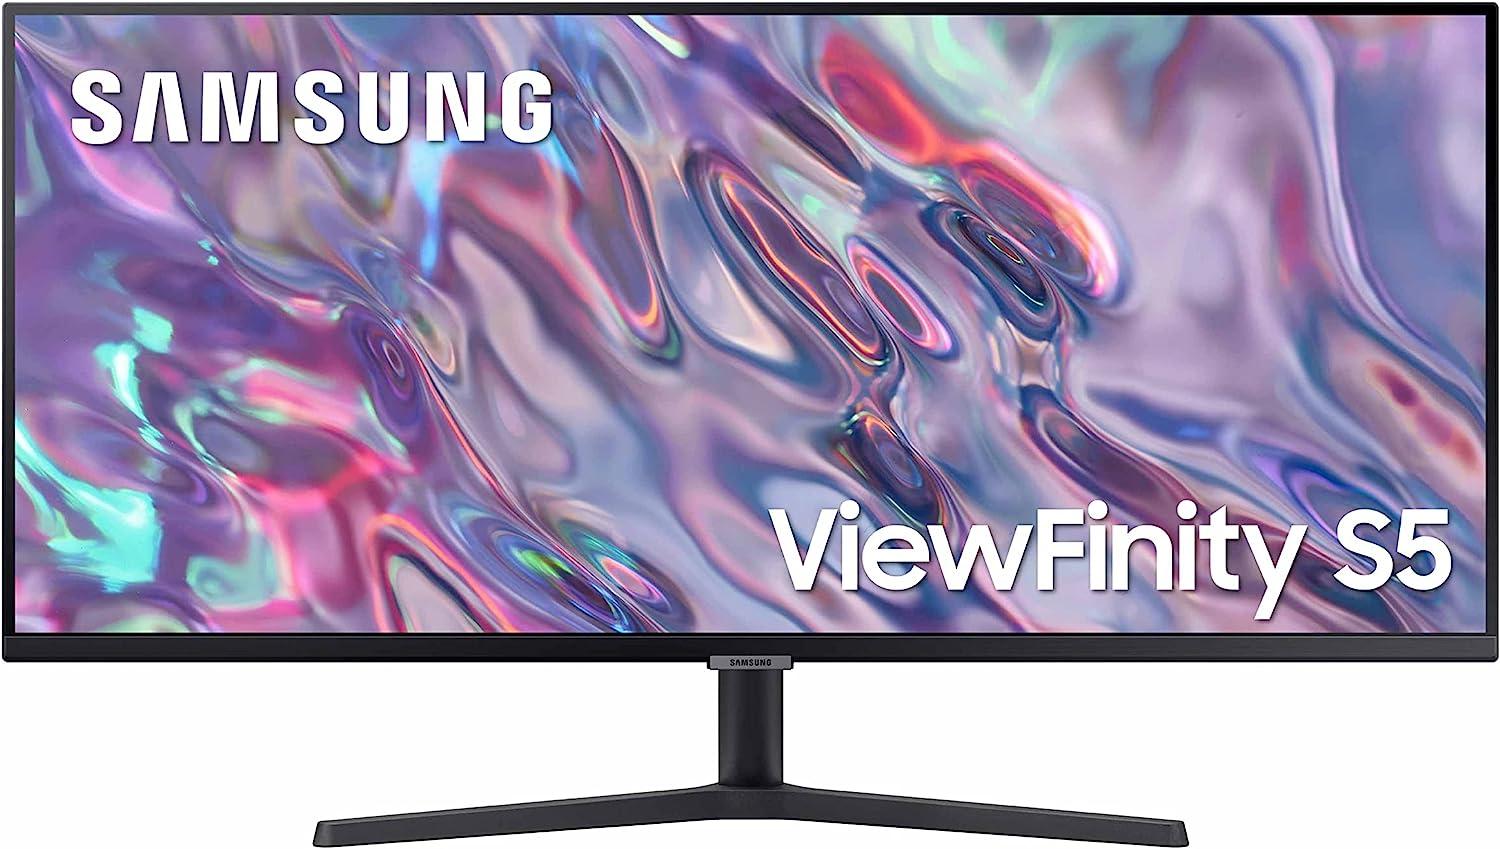 34in Samsung ViewFinity S50GC Ultra-WQHD Monitor for $249.99 Shipped